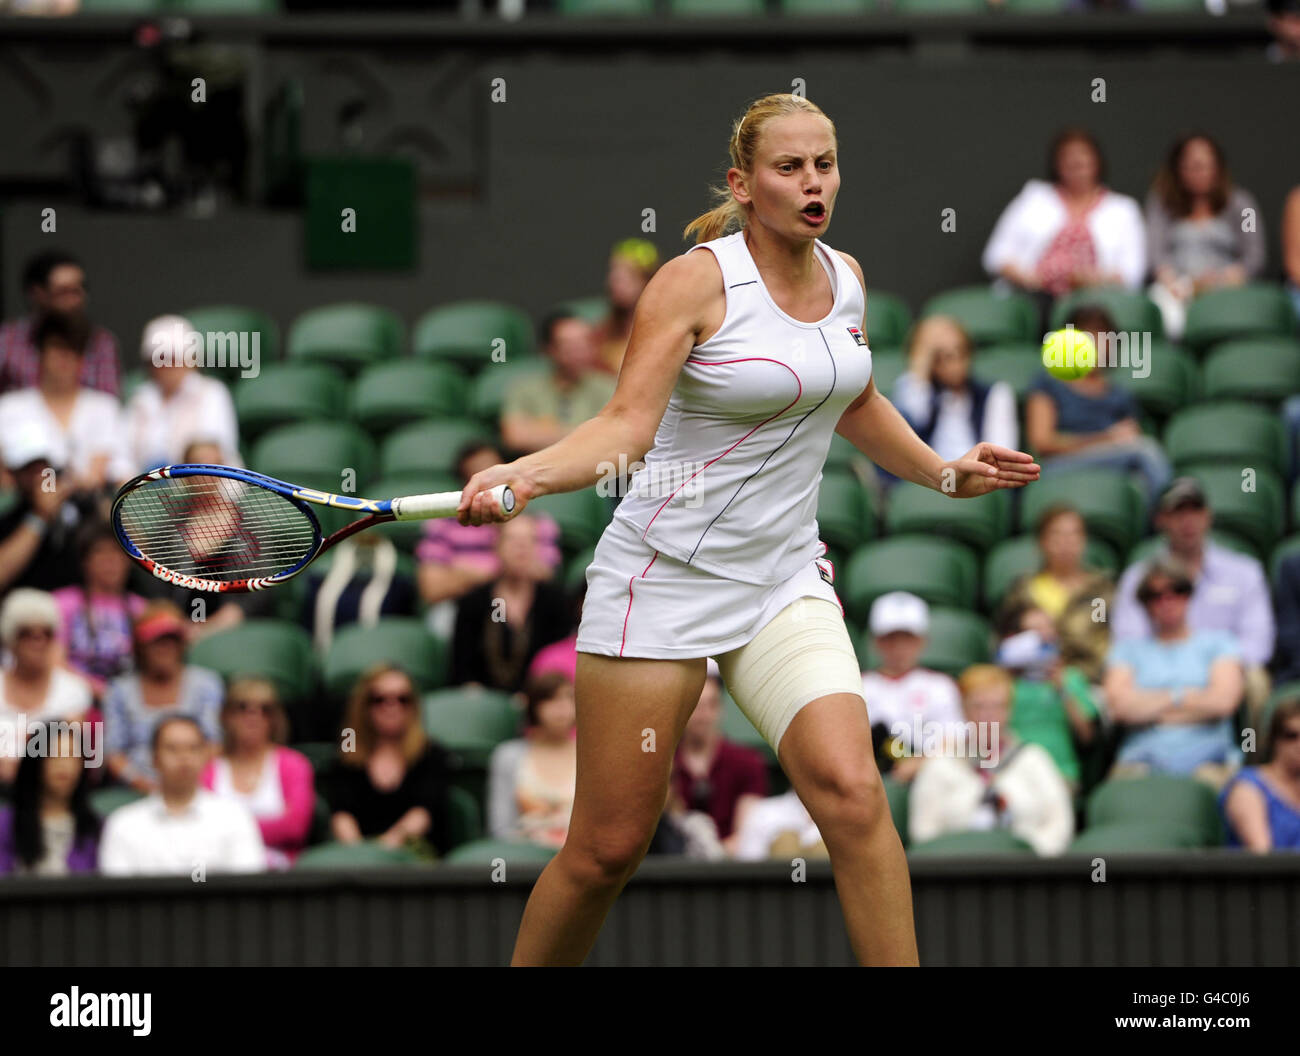 Australia's Jelena Dokic in action against Italy's Francesca Schiavone during day one of the 2011 Wimbledon Championships at the all England Lawn Tennis and Croquet Club, Wimbledon. Stock Photo